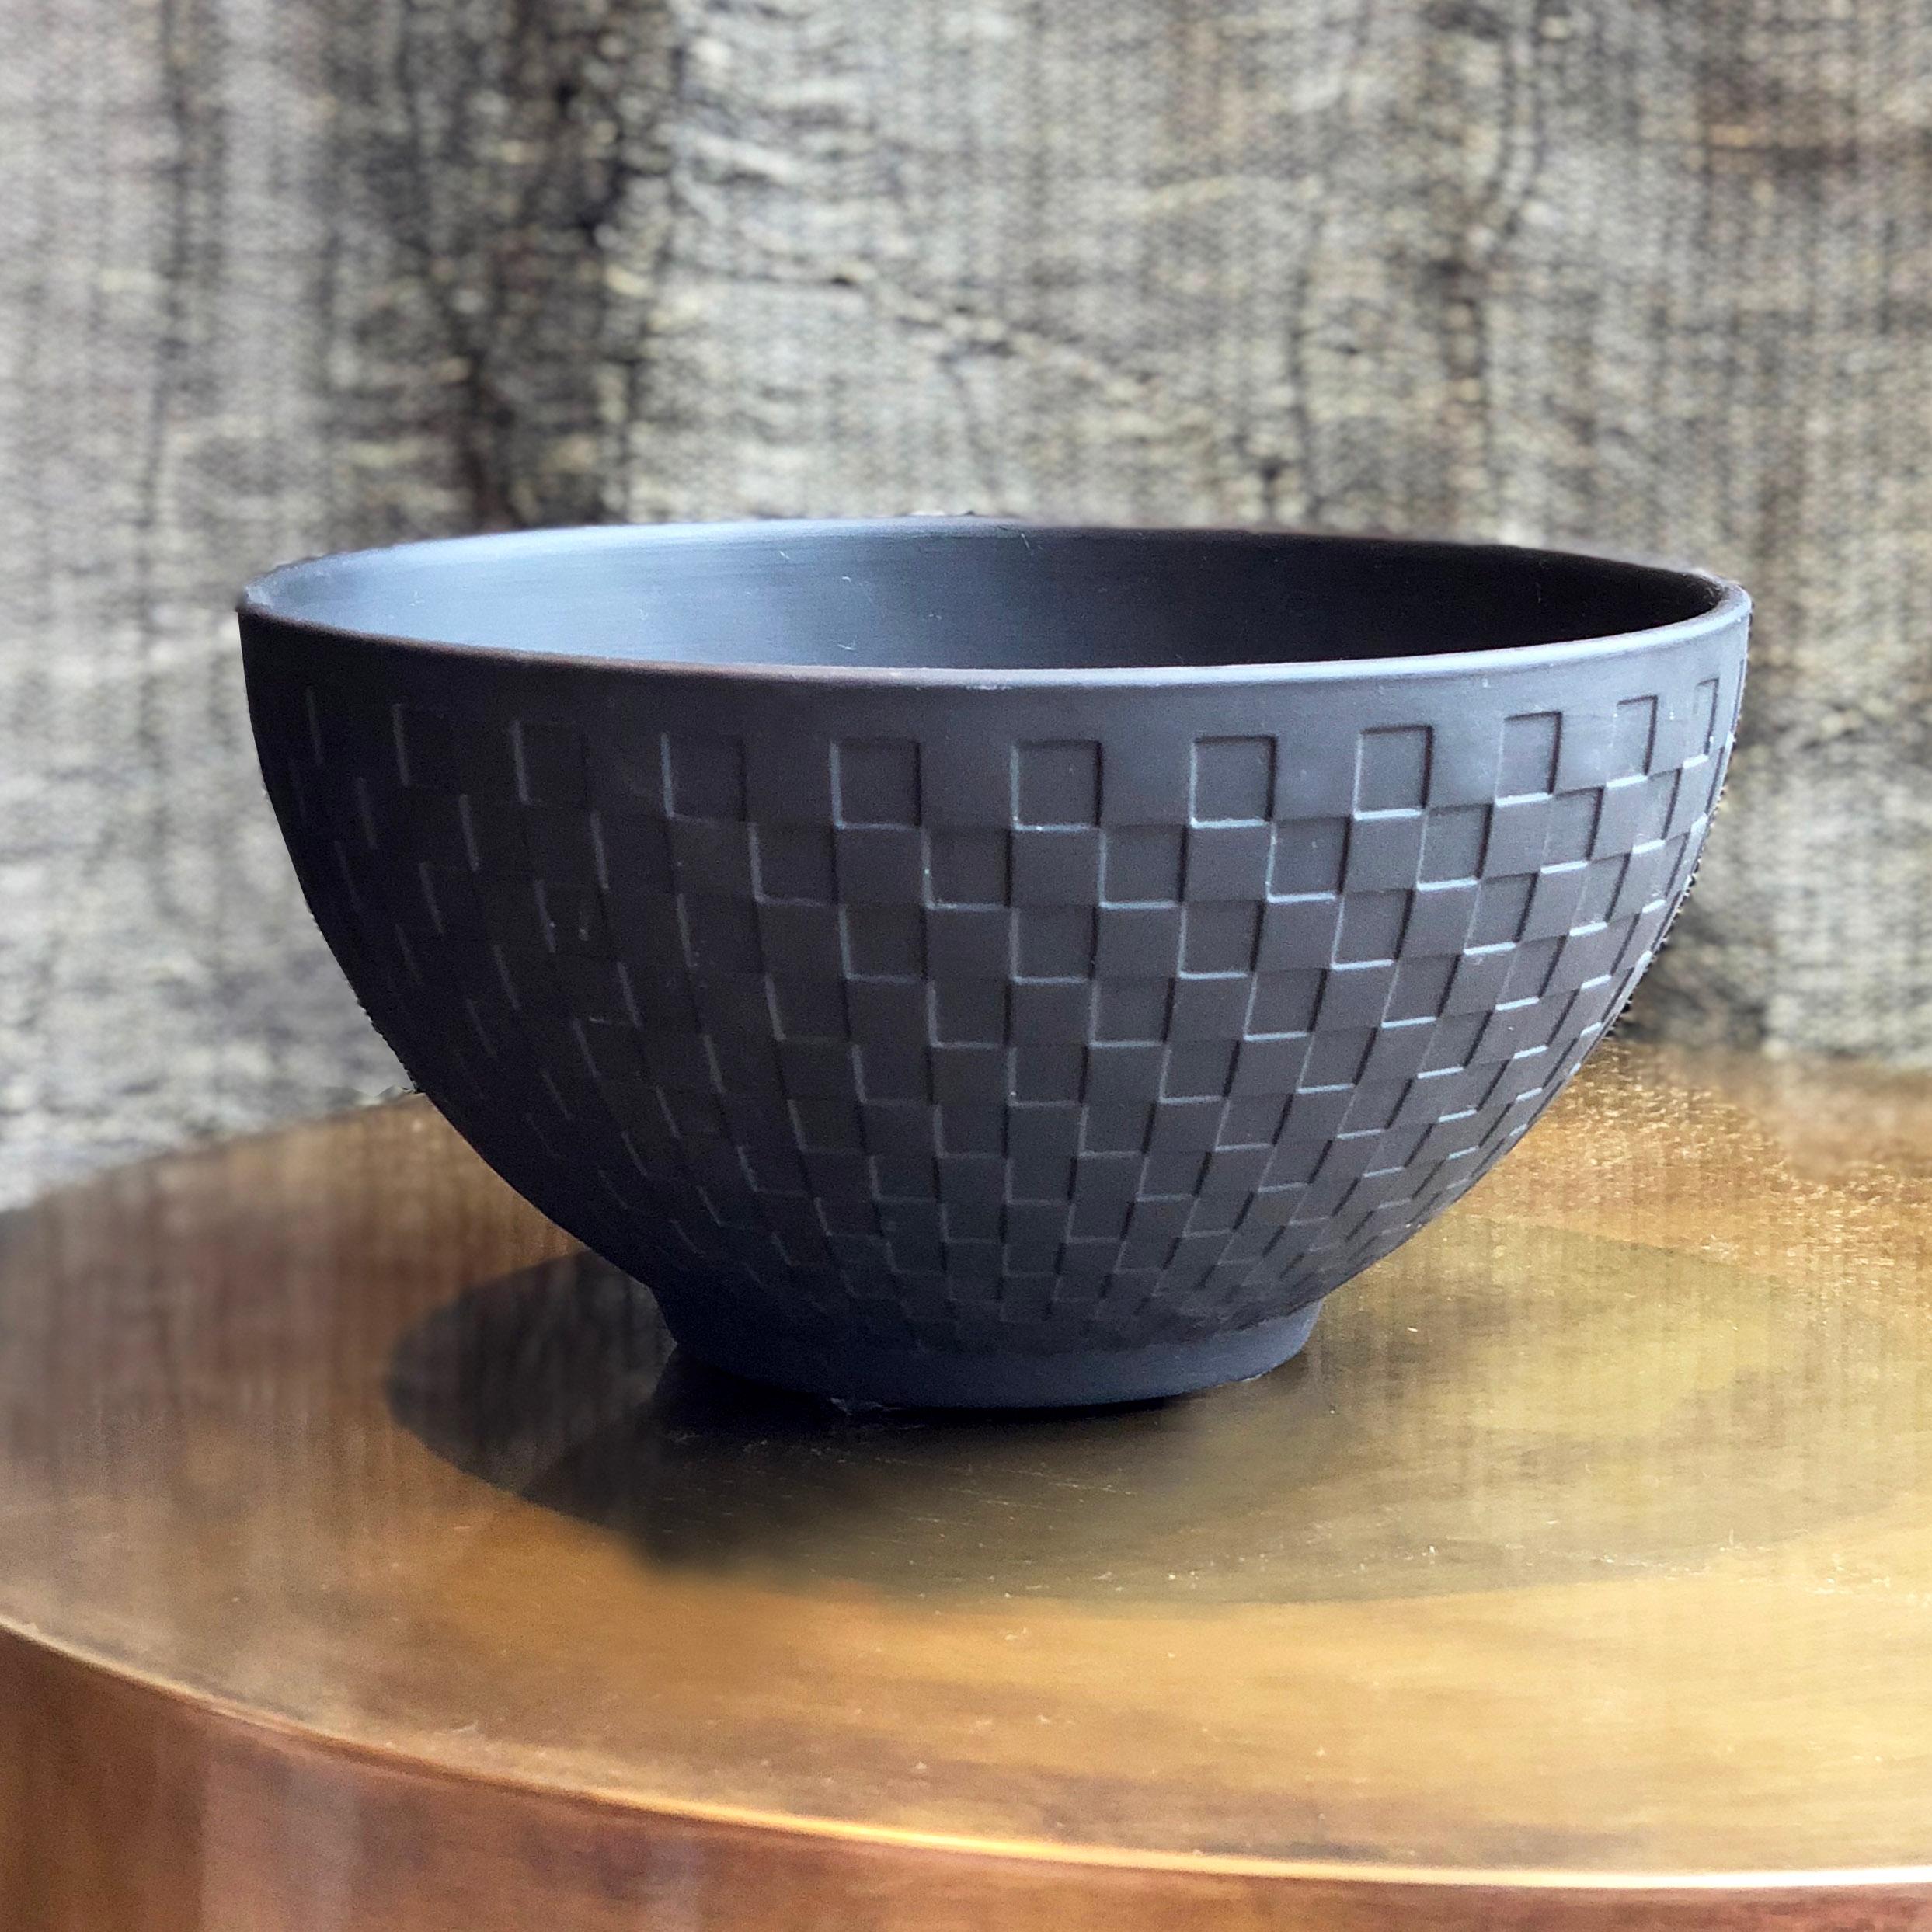 Vintage basalt bowl by Wedgwood from 1930’s featuring a checkered motif.

20Dia x 10H cm

Good vintage condition